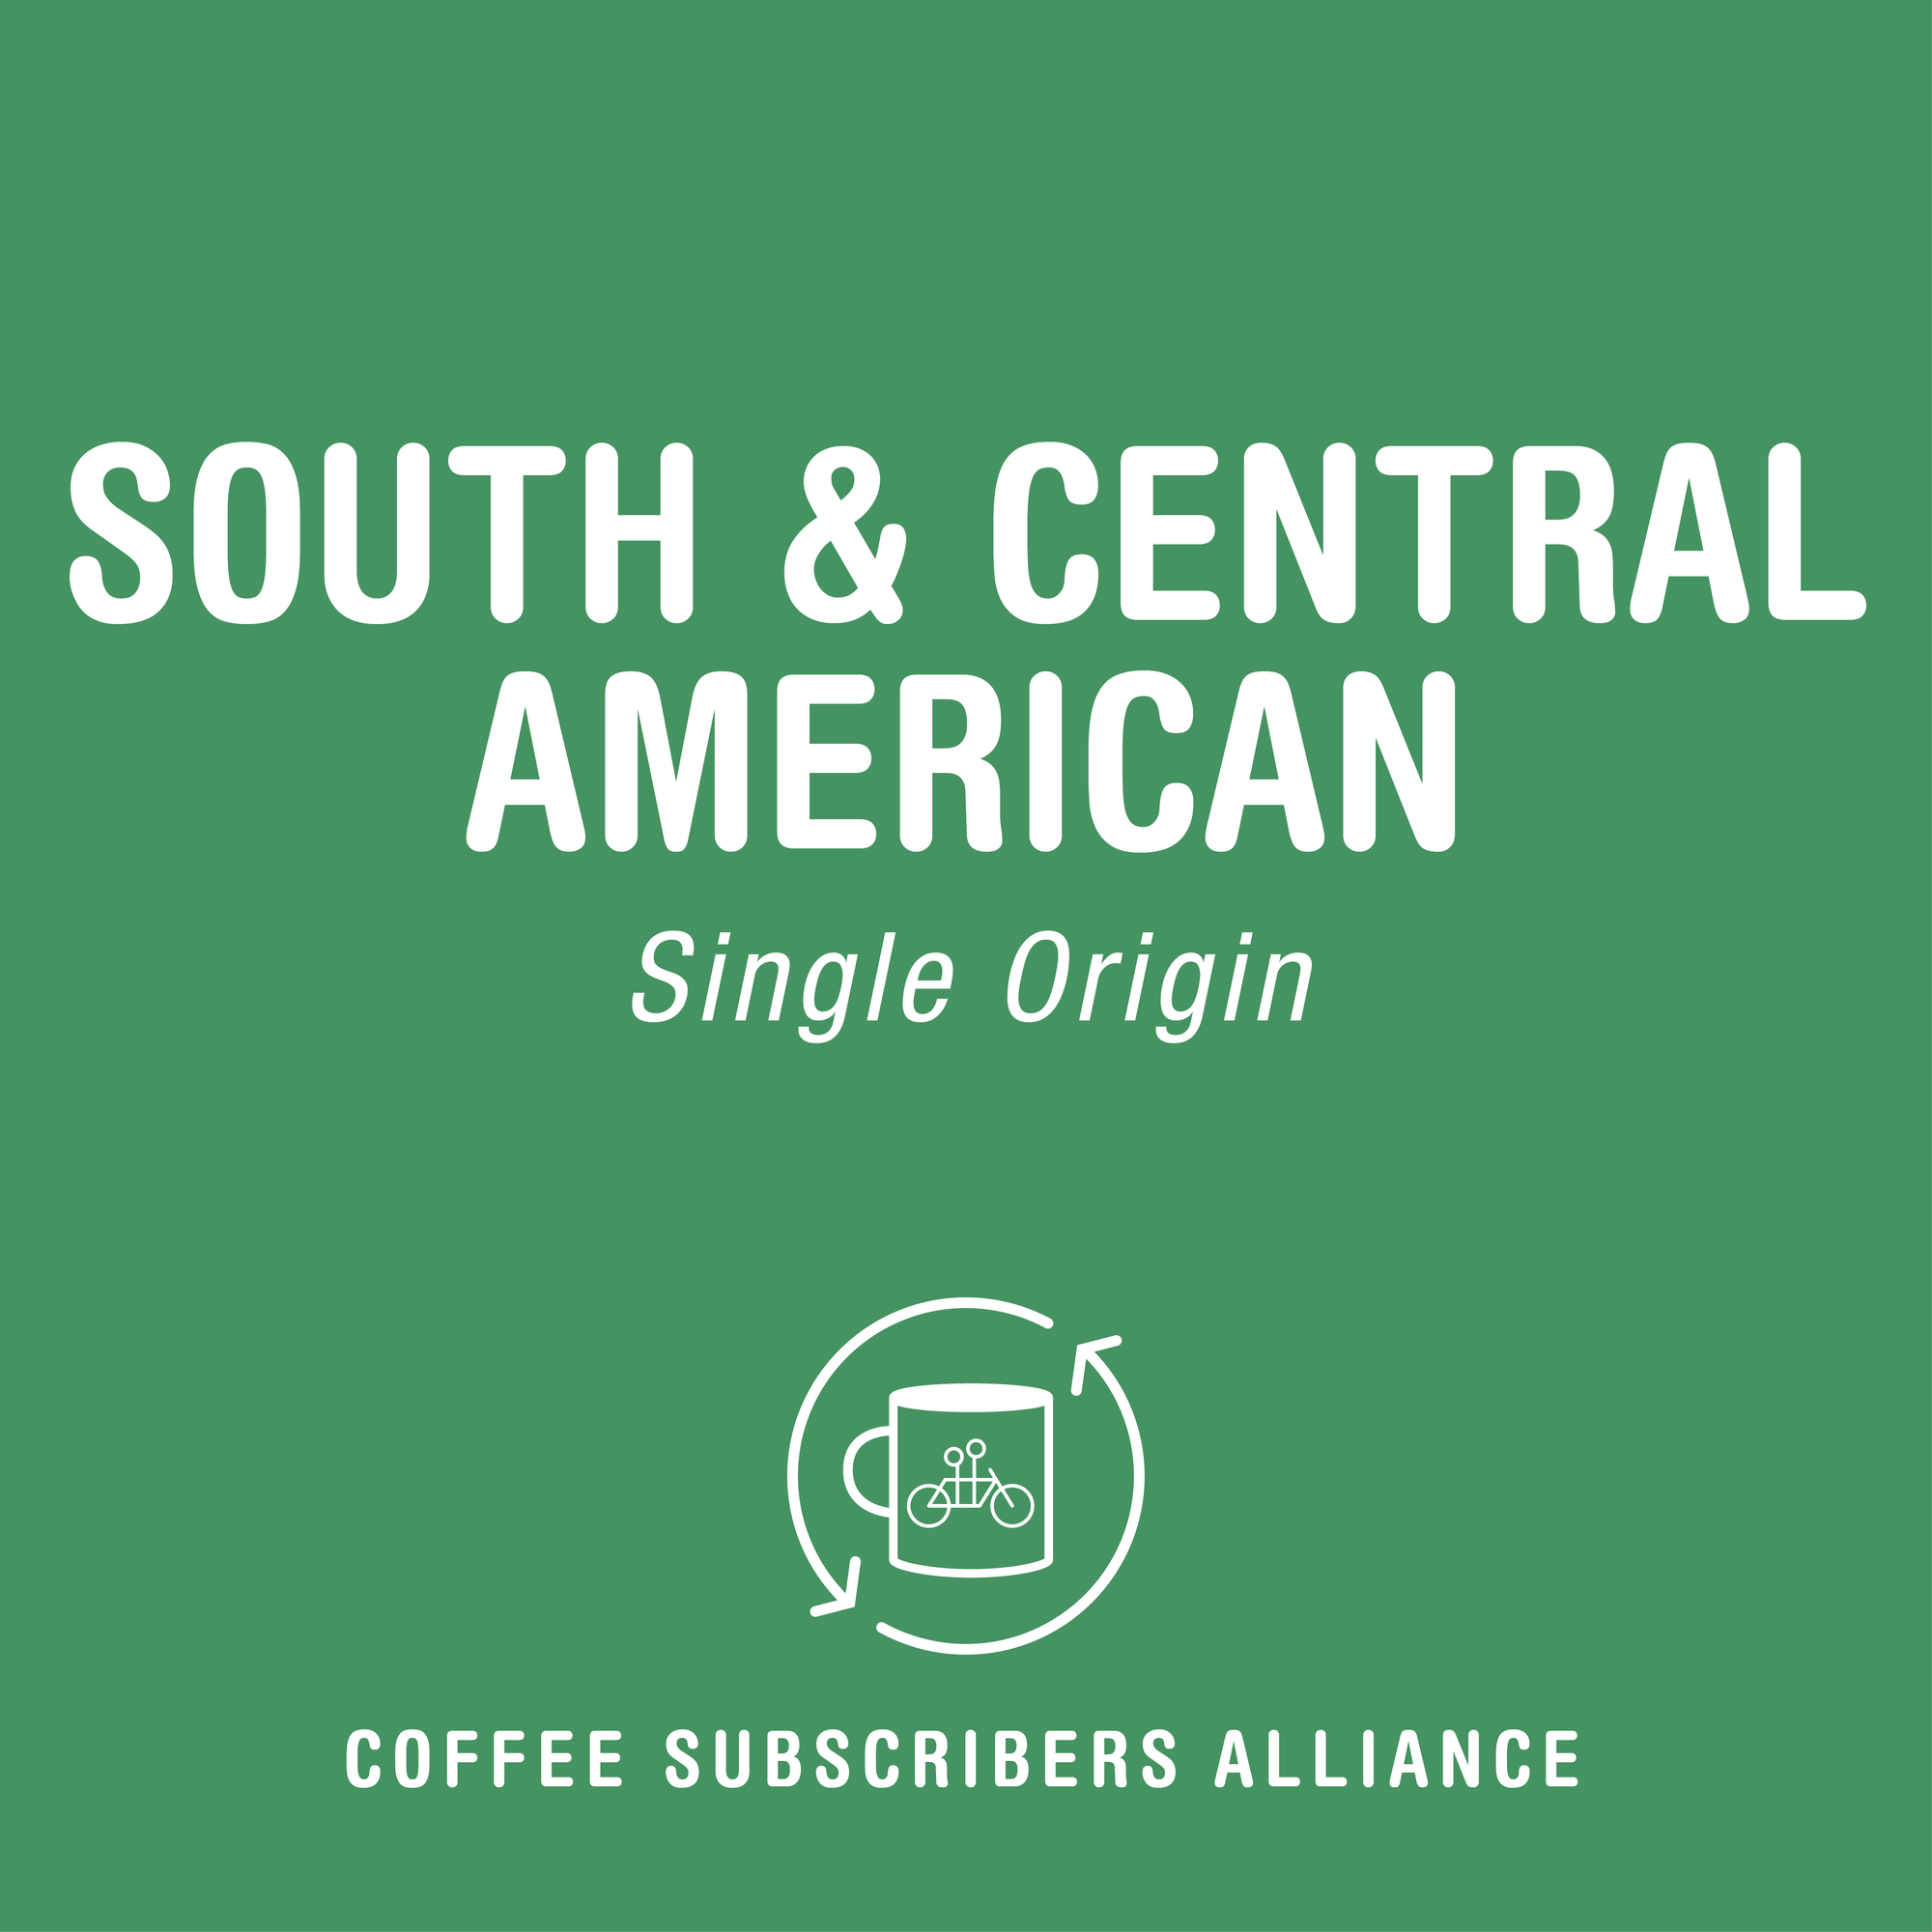 A graphic with a deep green background featuring white text that reads "South & Central American Subscription Gift - 8 Weeks x 3" and the Tandem Coffee Roasters logo, which includes a coffee cup and coffee beans.